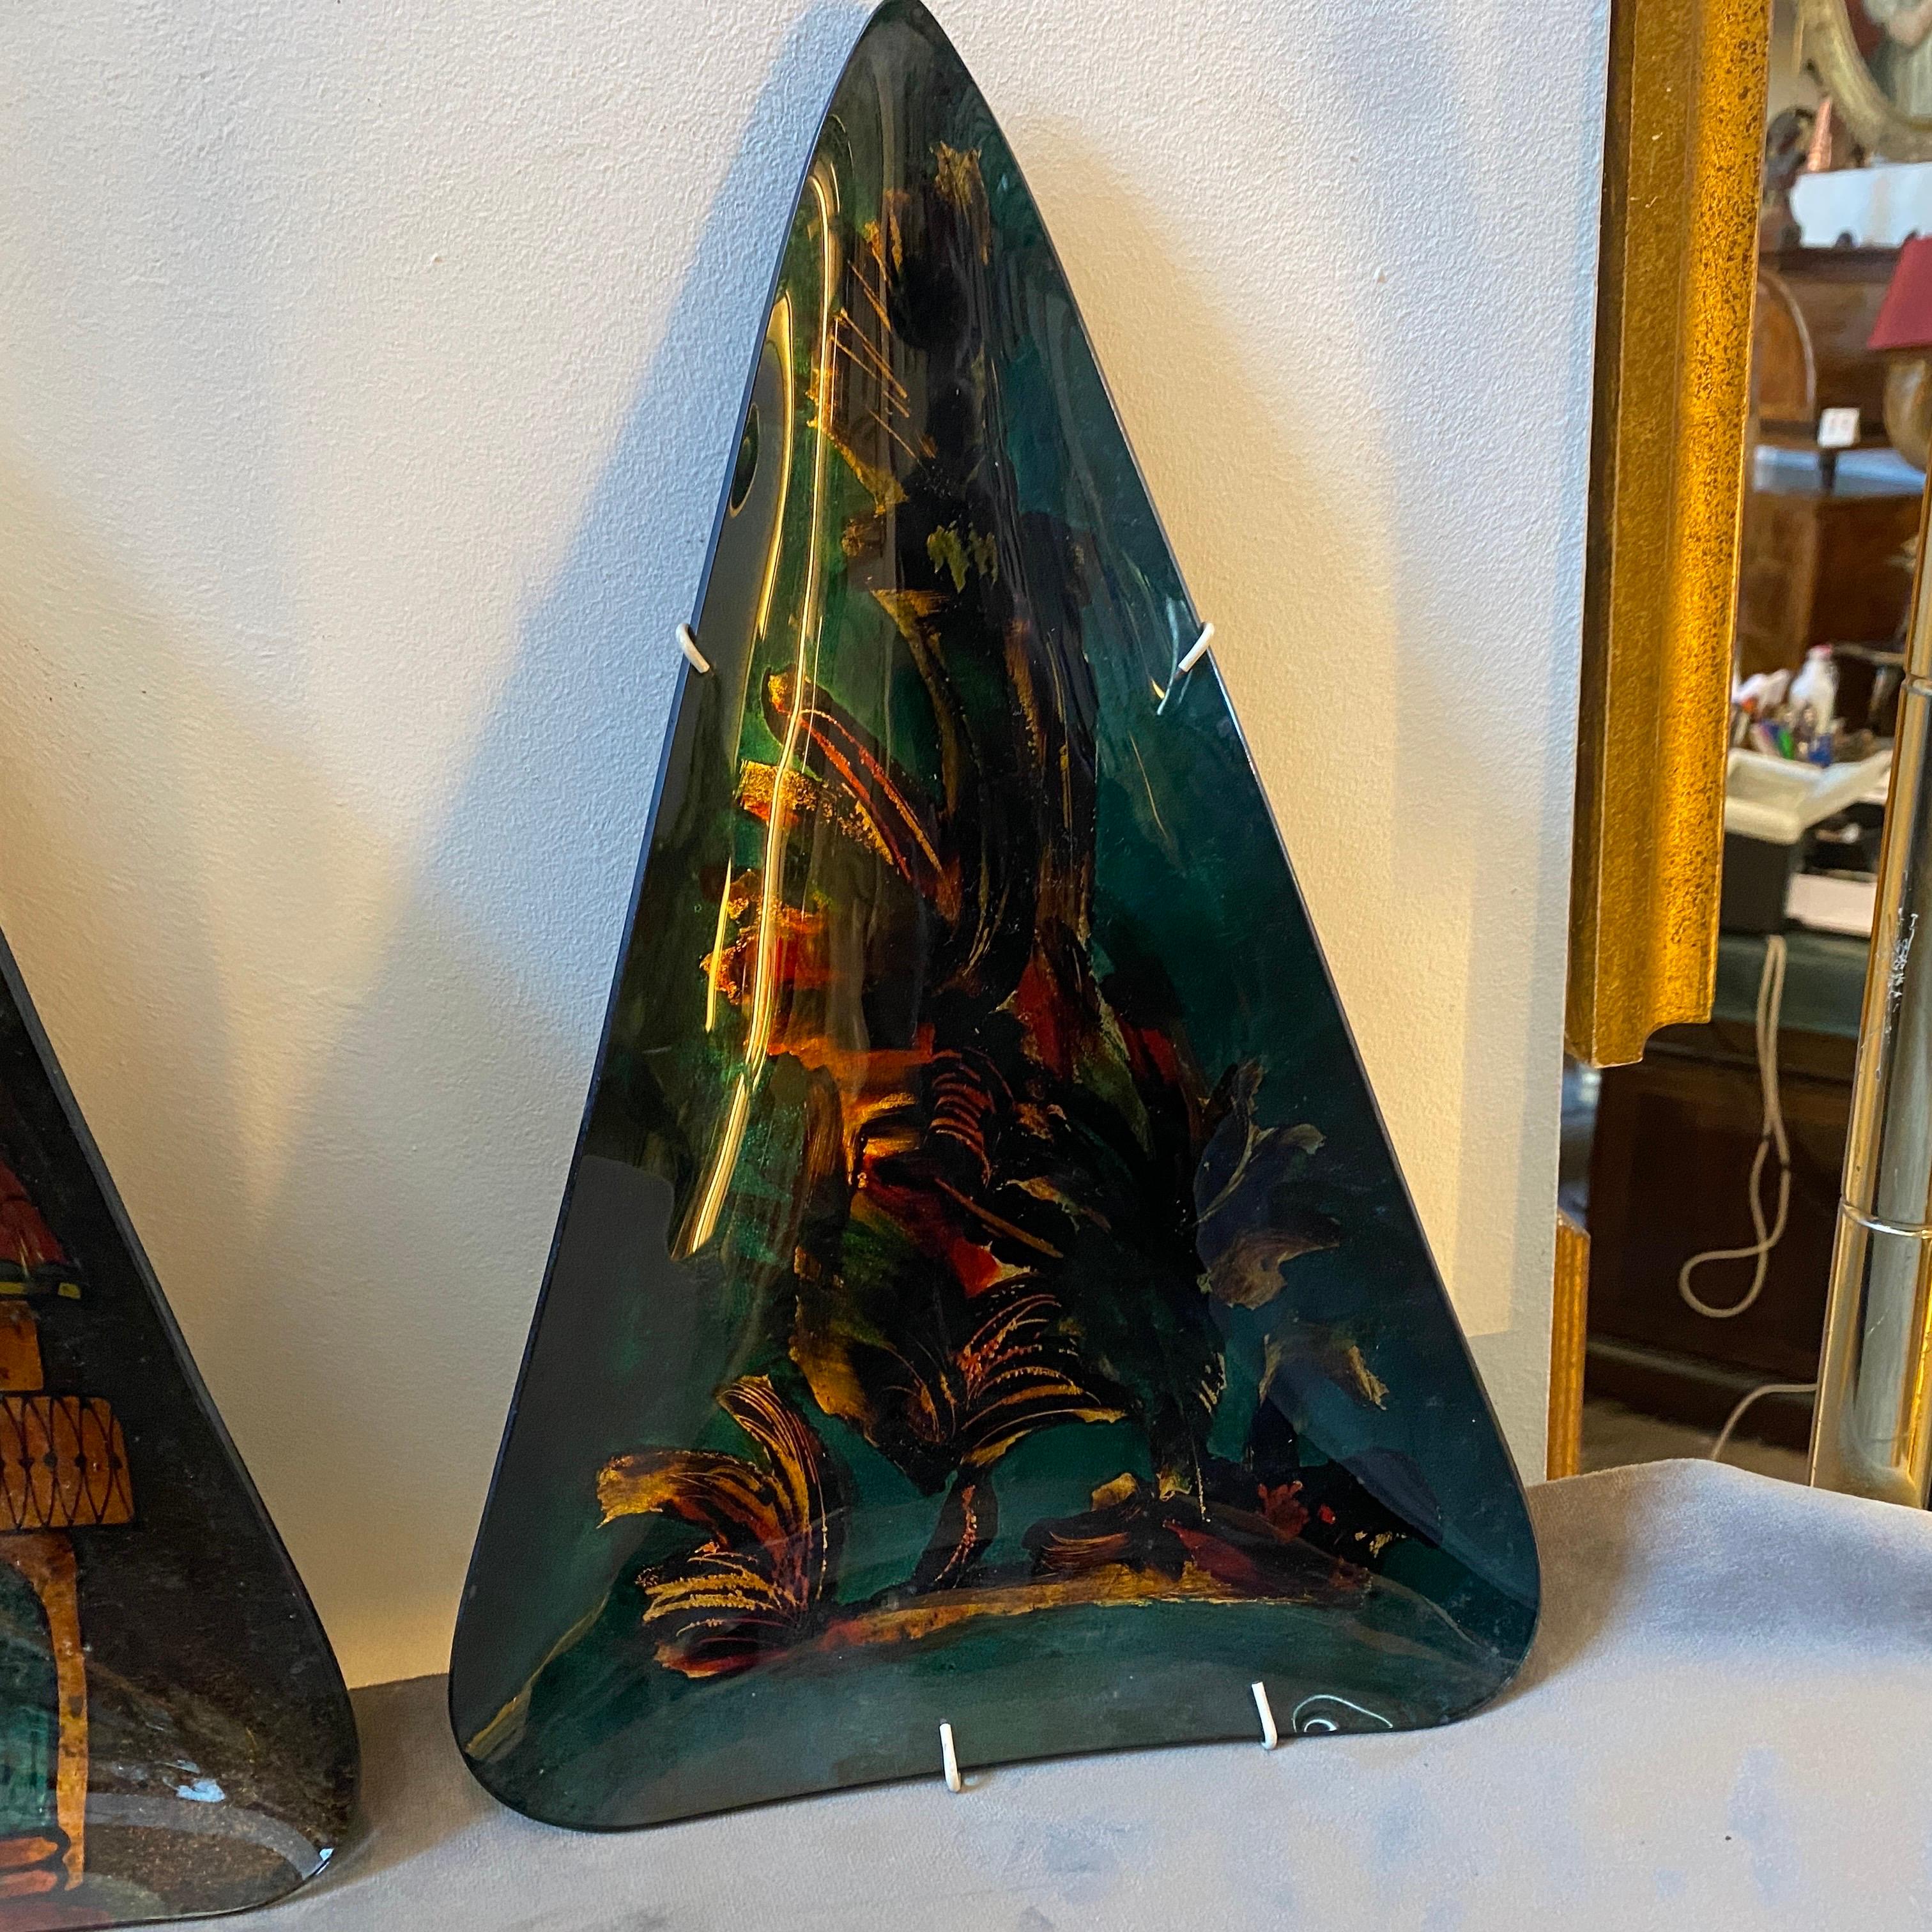 1950s, Set of Two Mid-Century Modern Paintings on Mural Triangular Glass Plates For Sale 3